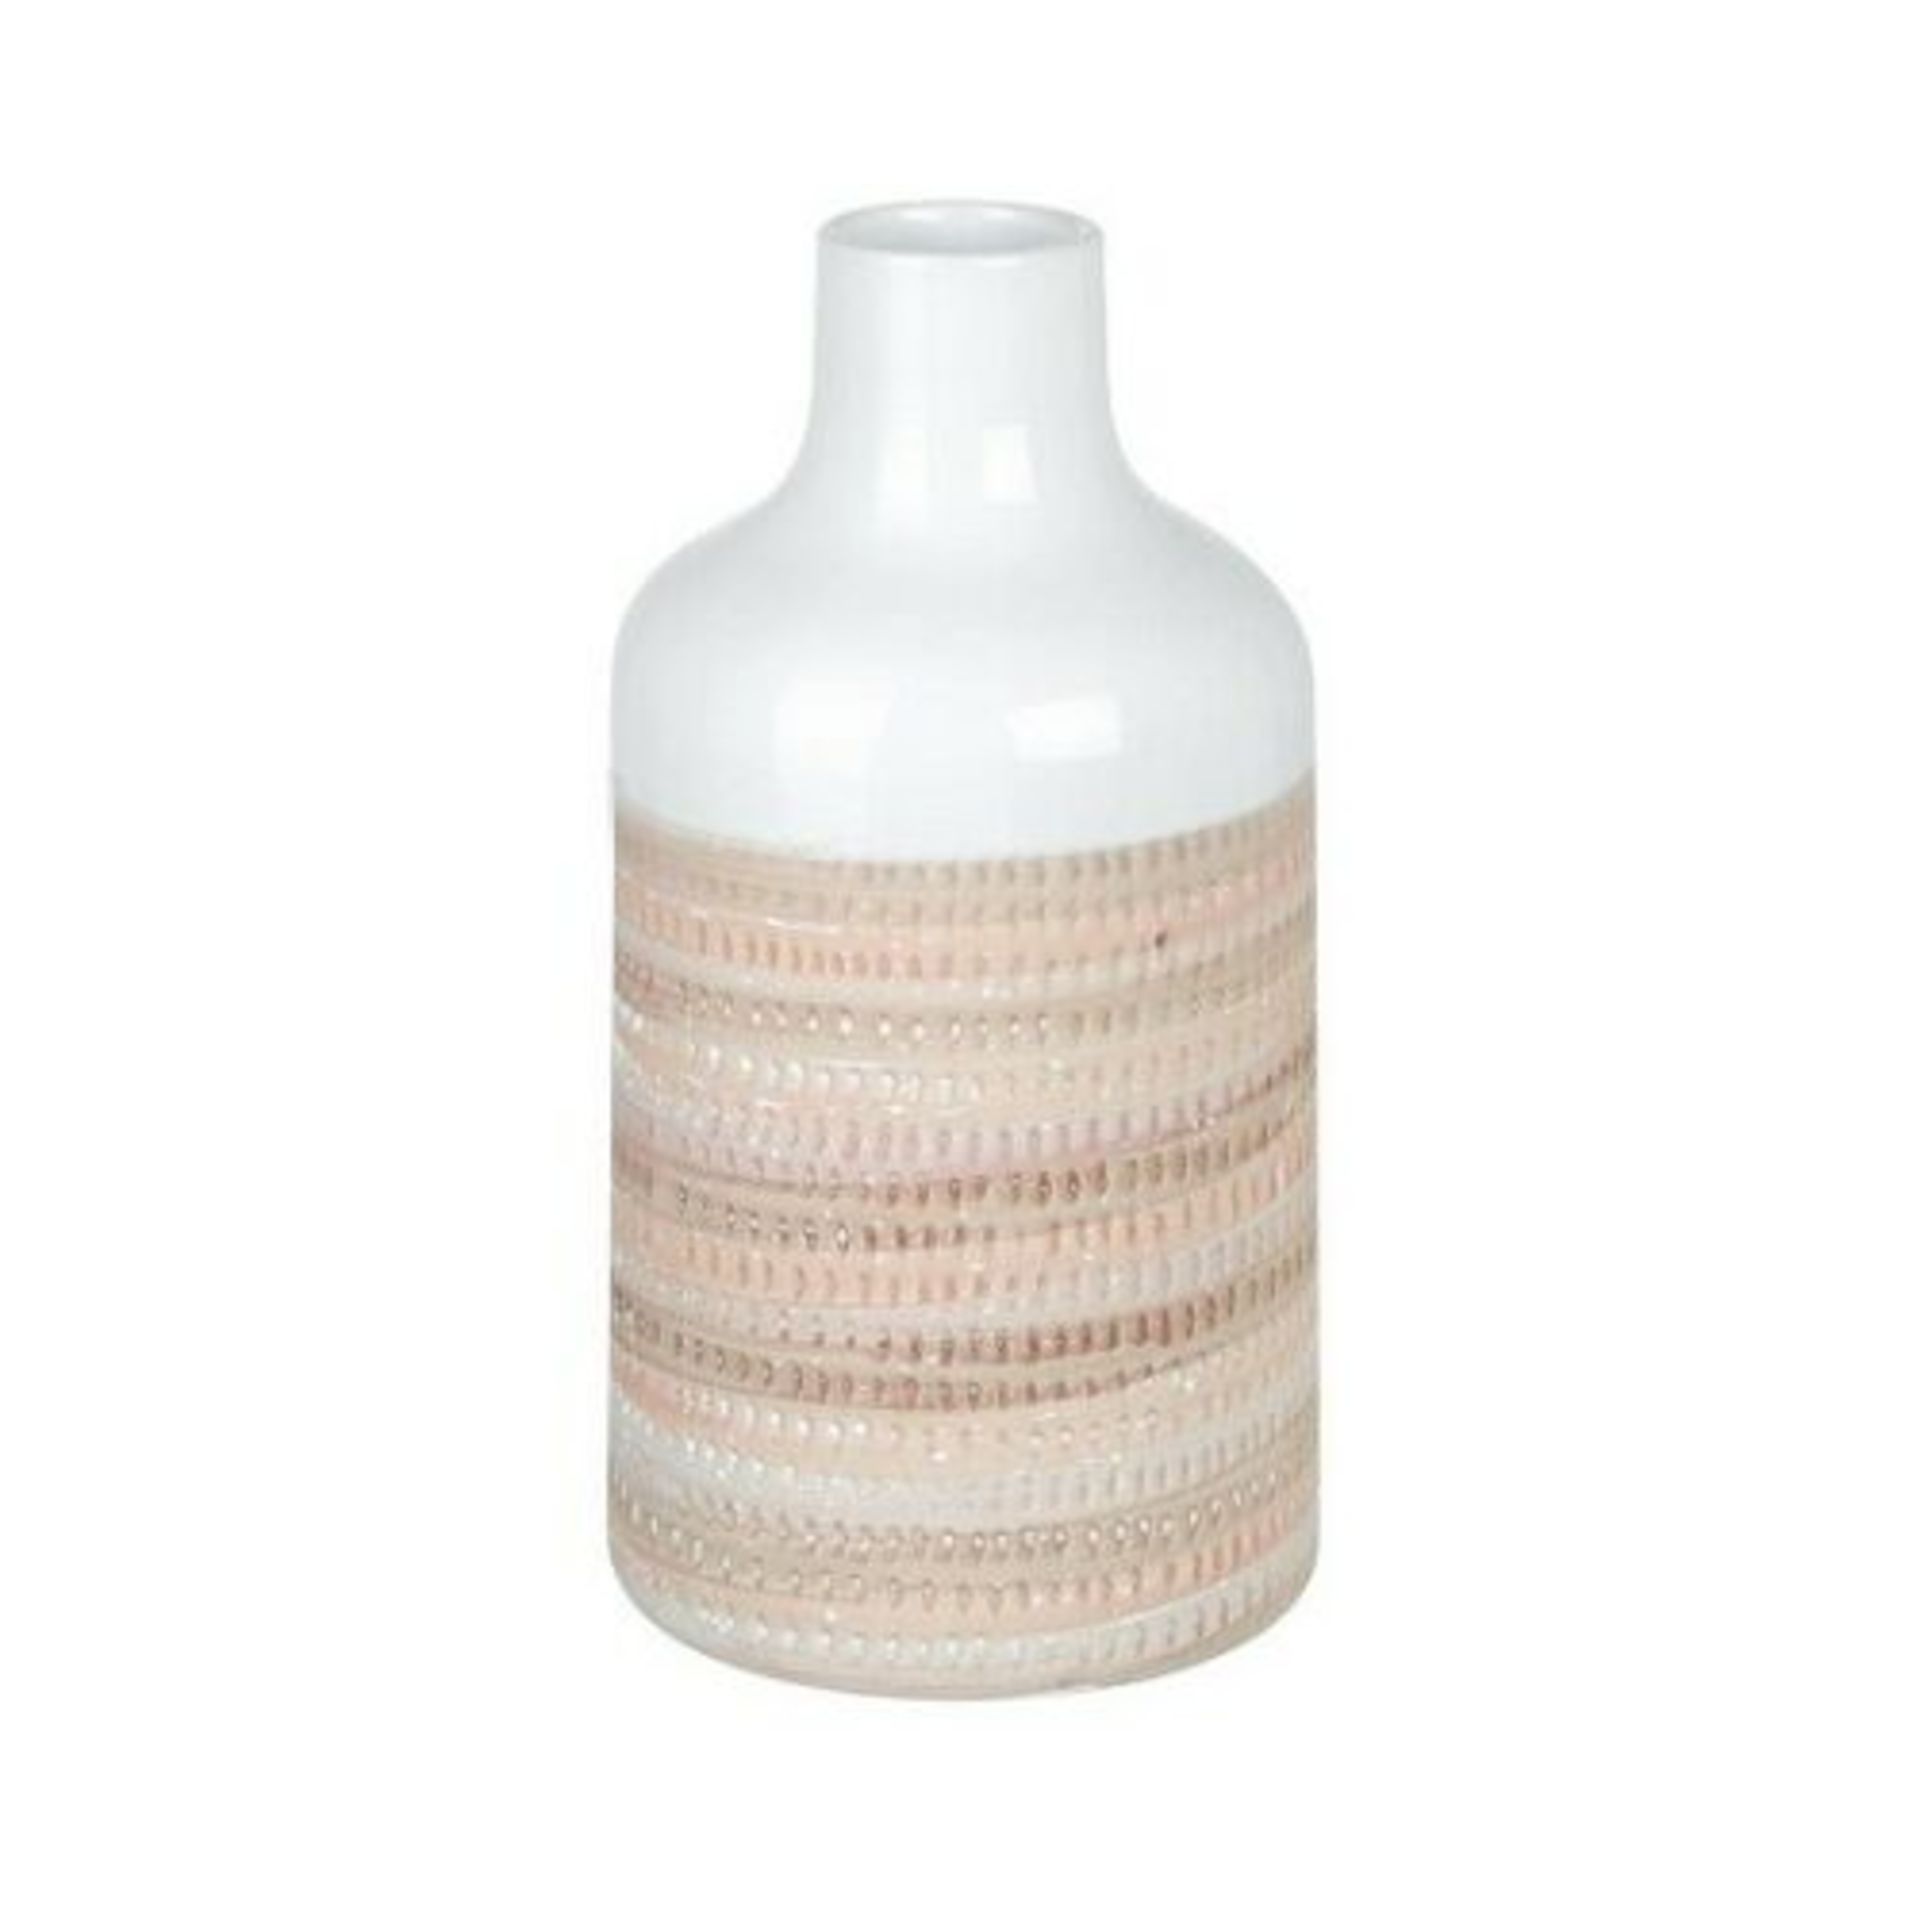 Mambo Vase White and Pink 130x320mmh Brand New Parlane Accessories We take our product seriously and